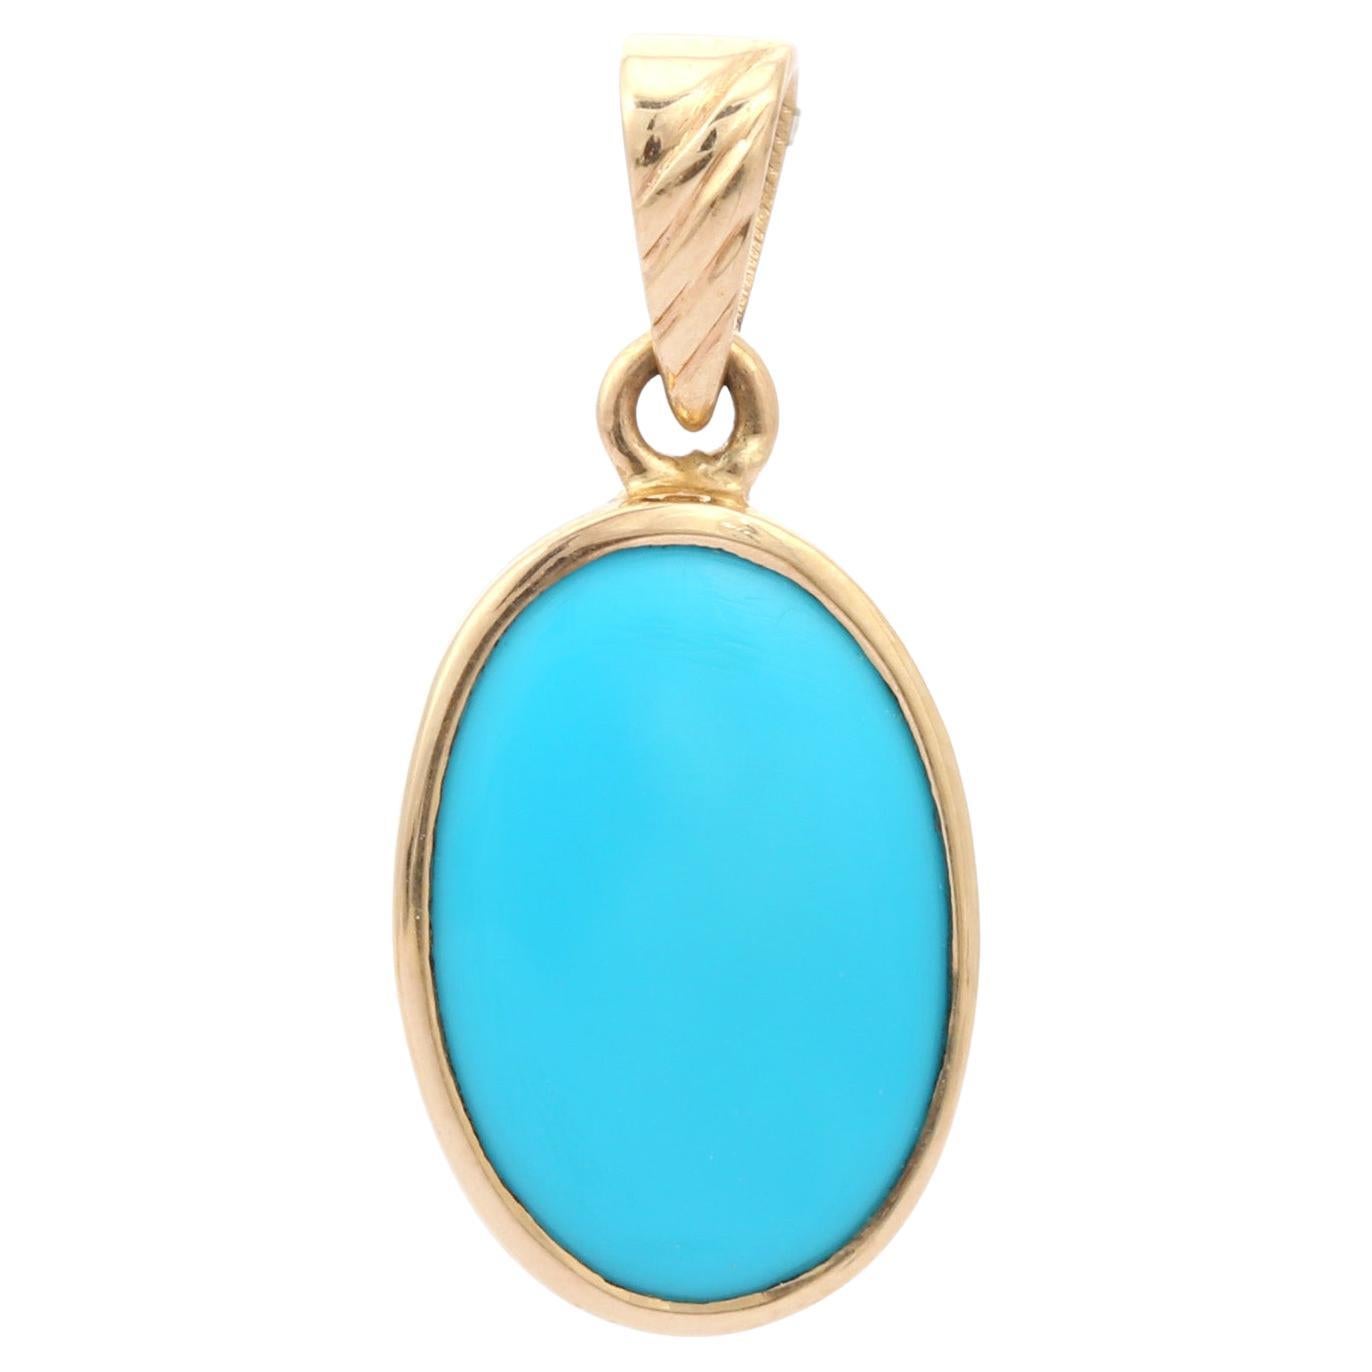 Turquoise pendant in 14K Gold. It has a oval cut gemstone that completes your look with a decent touch. Pendants are used to wear or gifted to represent love and promises. It's an attractive jewelry piece that goes with every basic outfit and